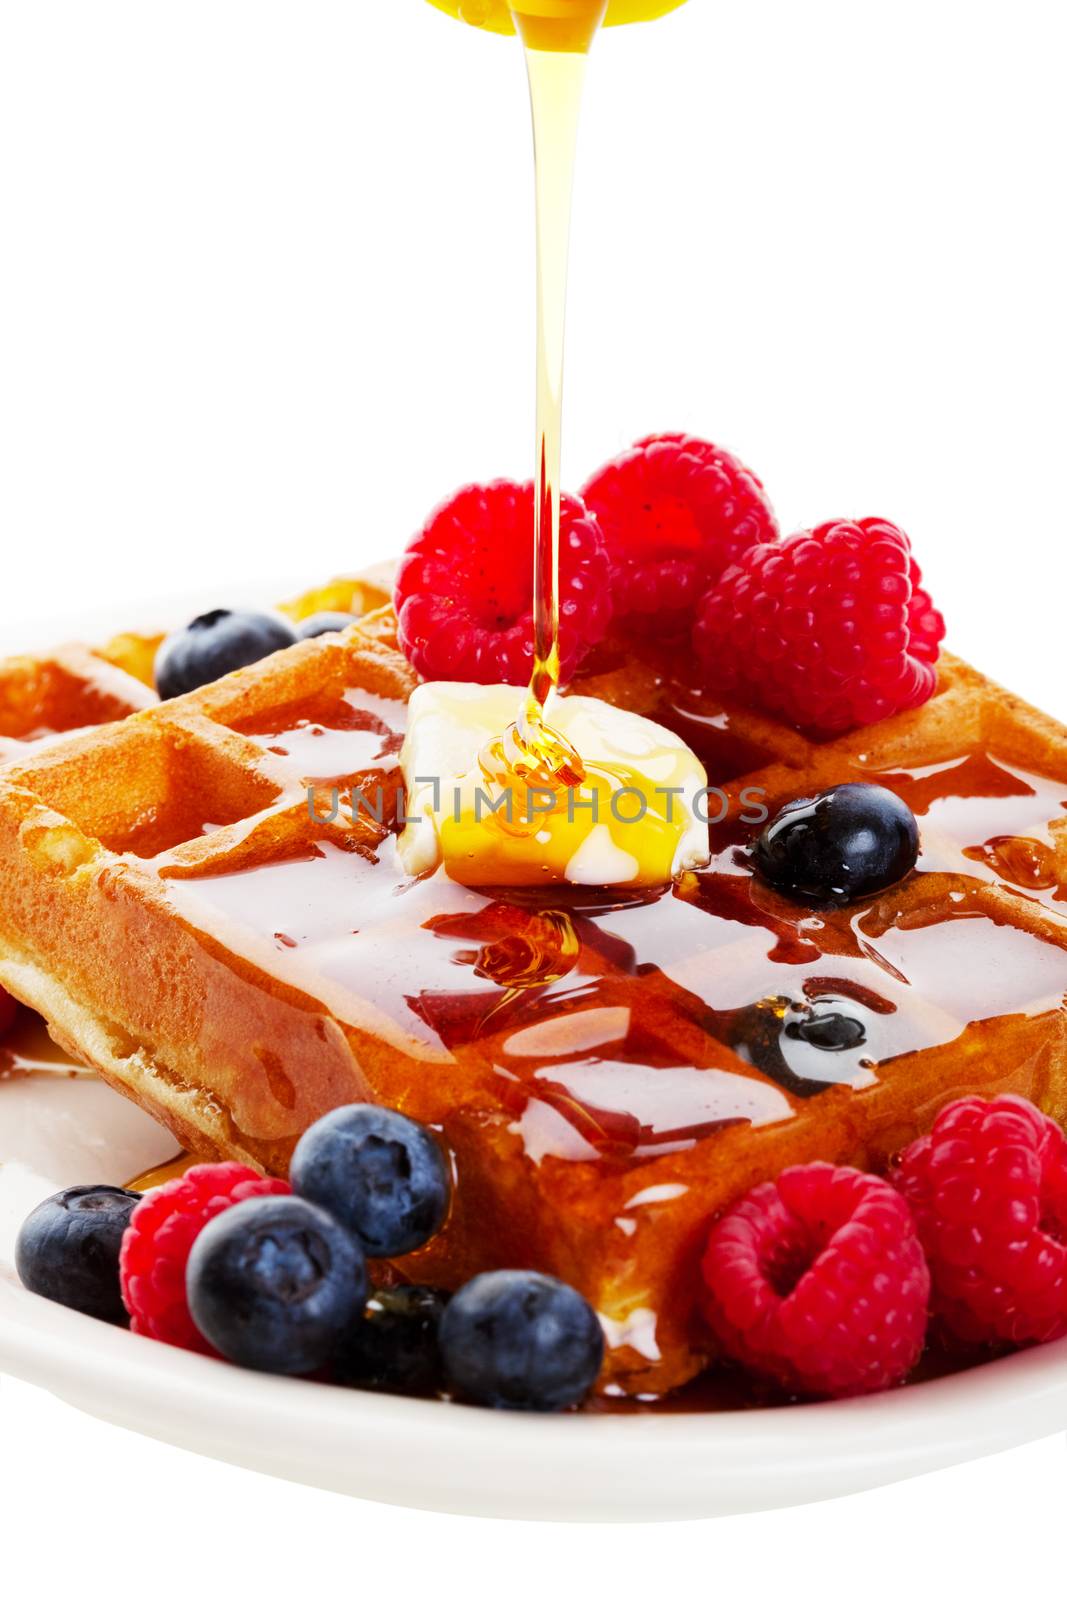 A stream of golden Canadian maple syrup adds the finishing touch to a delicious breakfast of belgian waffles with fresh raspberries and blueberries.  Shot on white background.